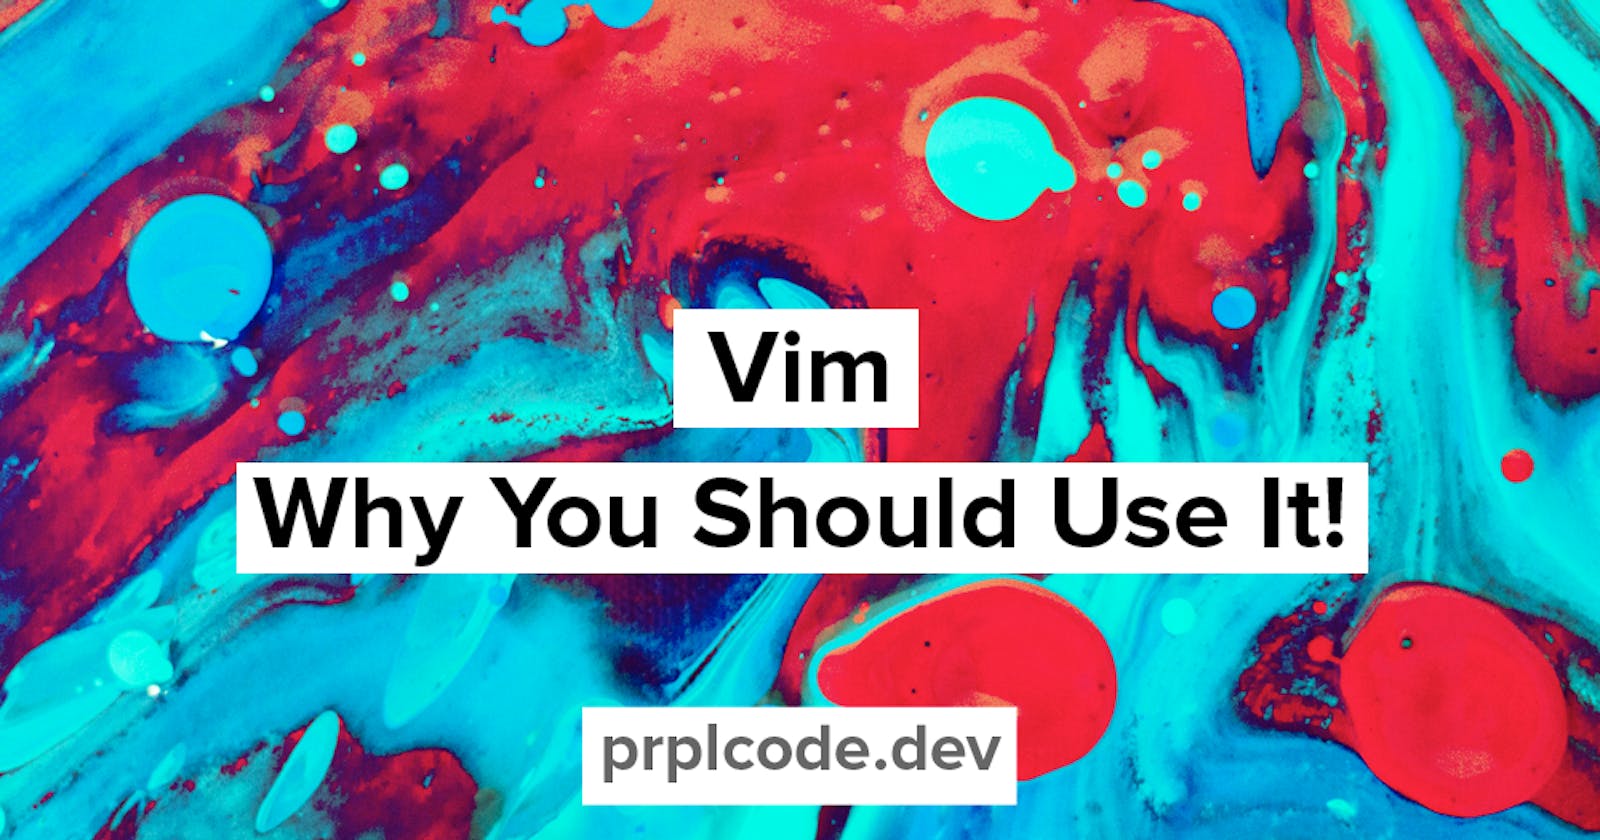 Vim — Why You Should Use It!